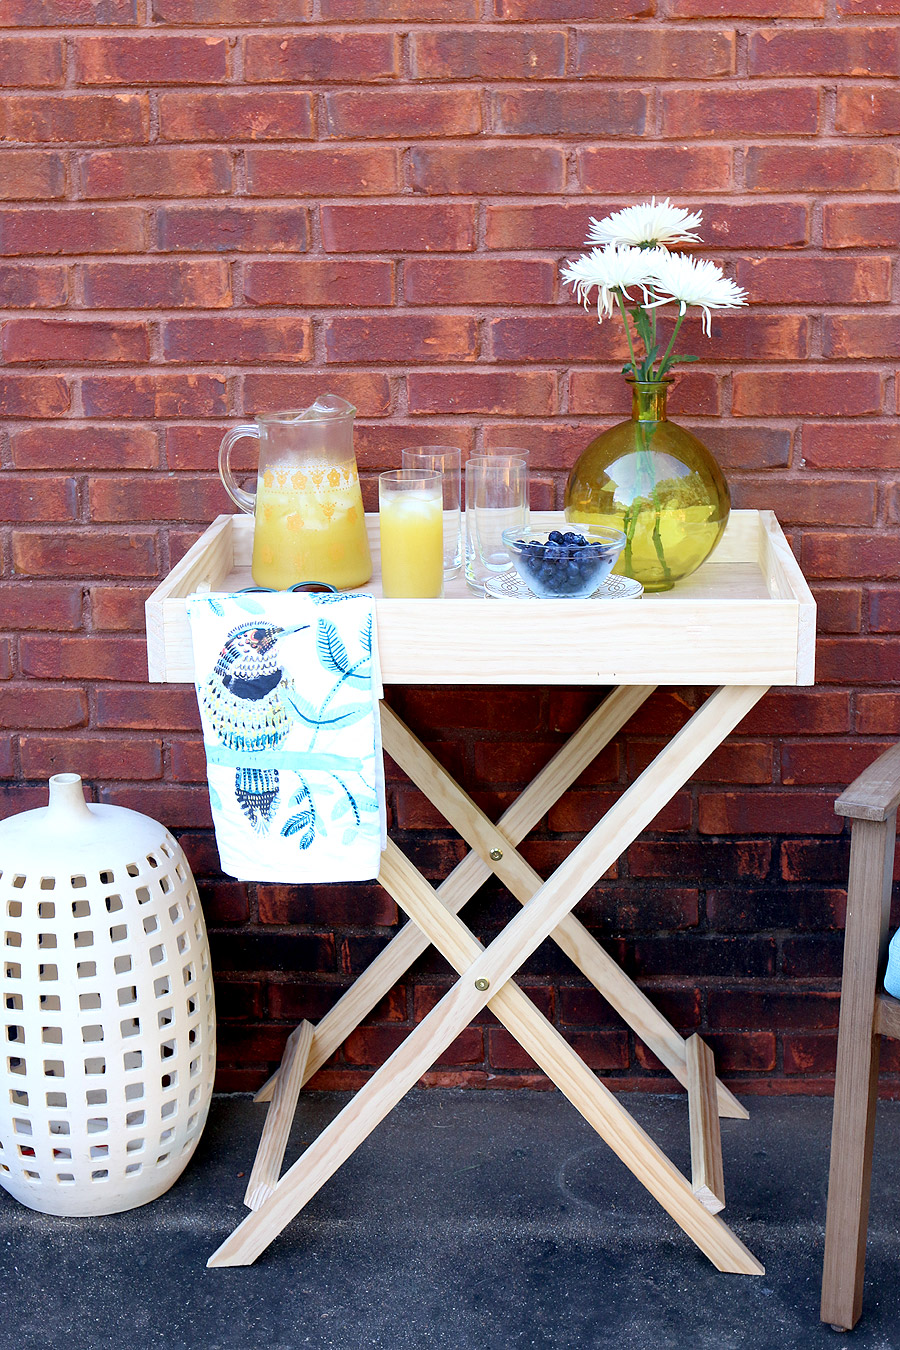 Tutorial on how to build a DIY West Elm-inspired Butler Stand